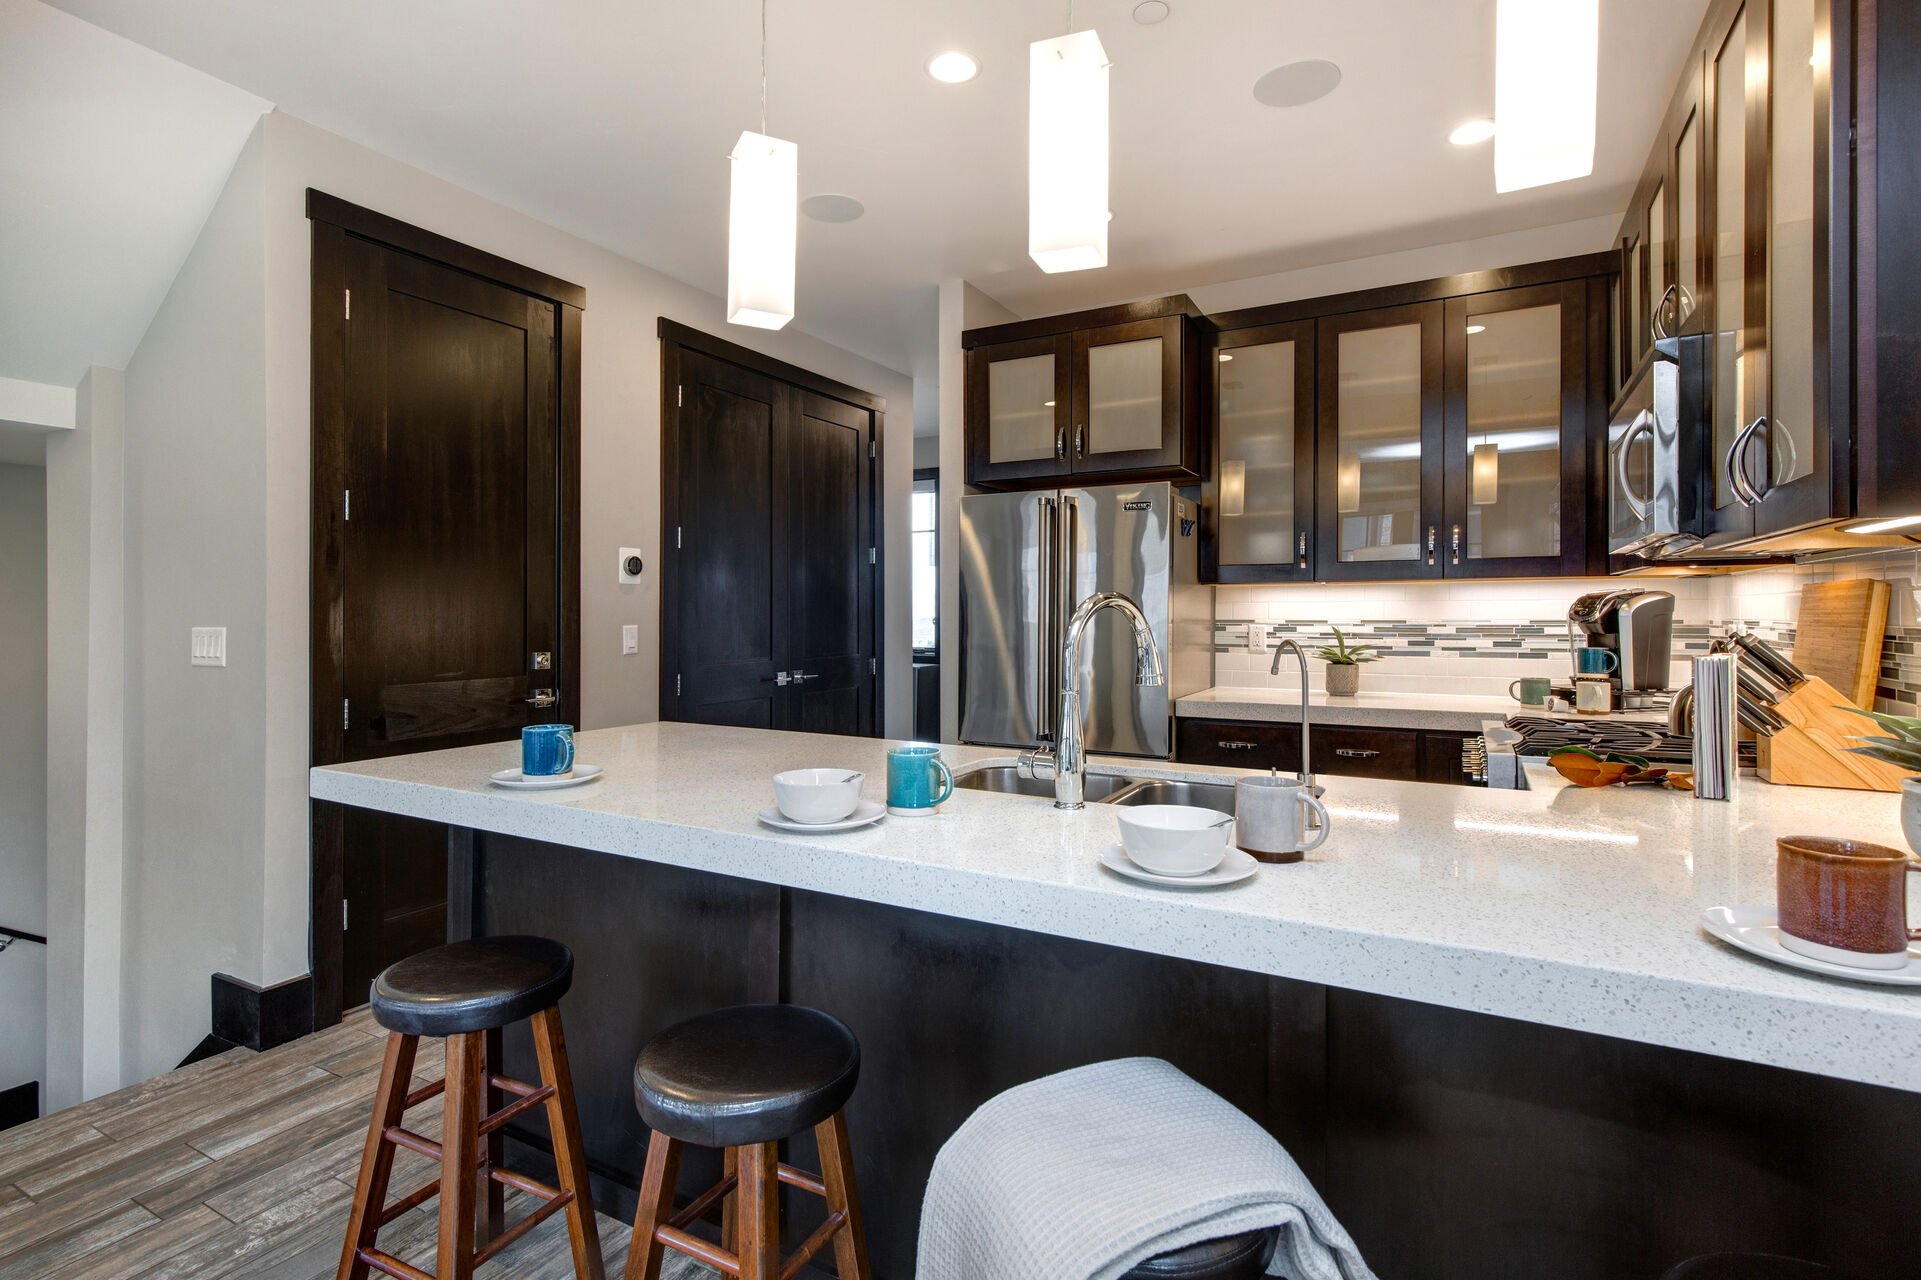 Fully Equipped Kitchen with beautiful stone countertops, stainless steel Viking appliances, and bar seating for four